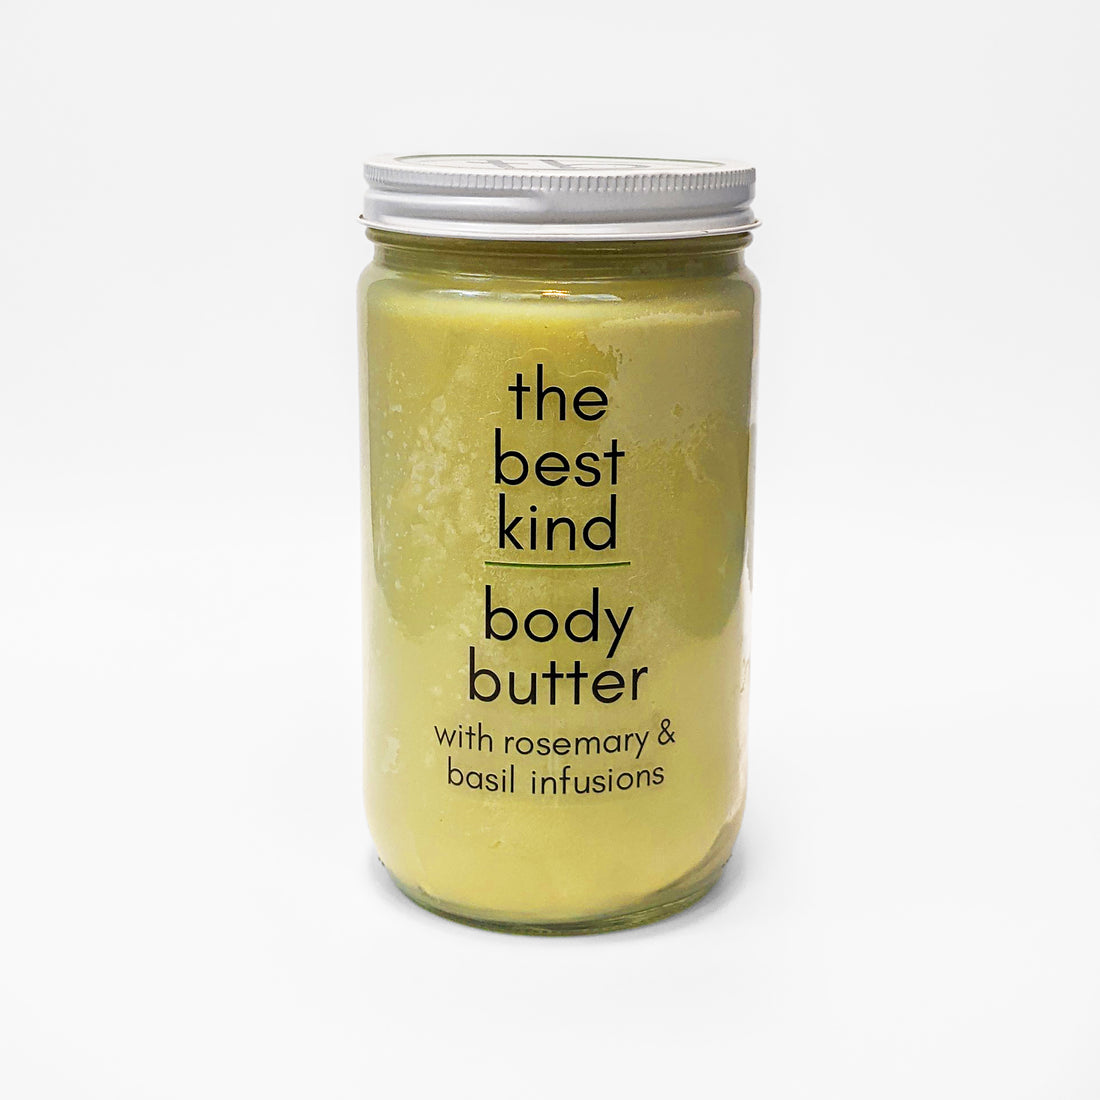 The Best Kind 32 oz. body butter